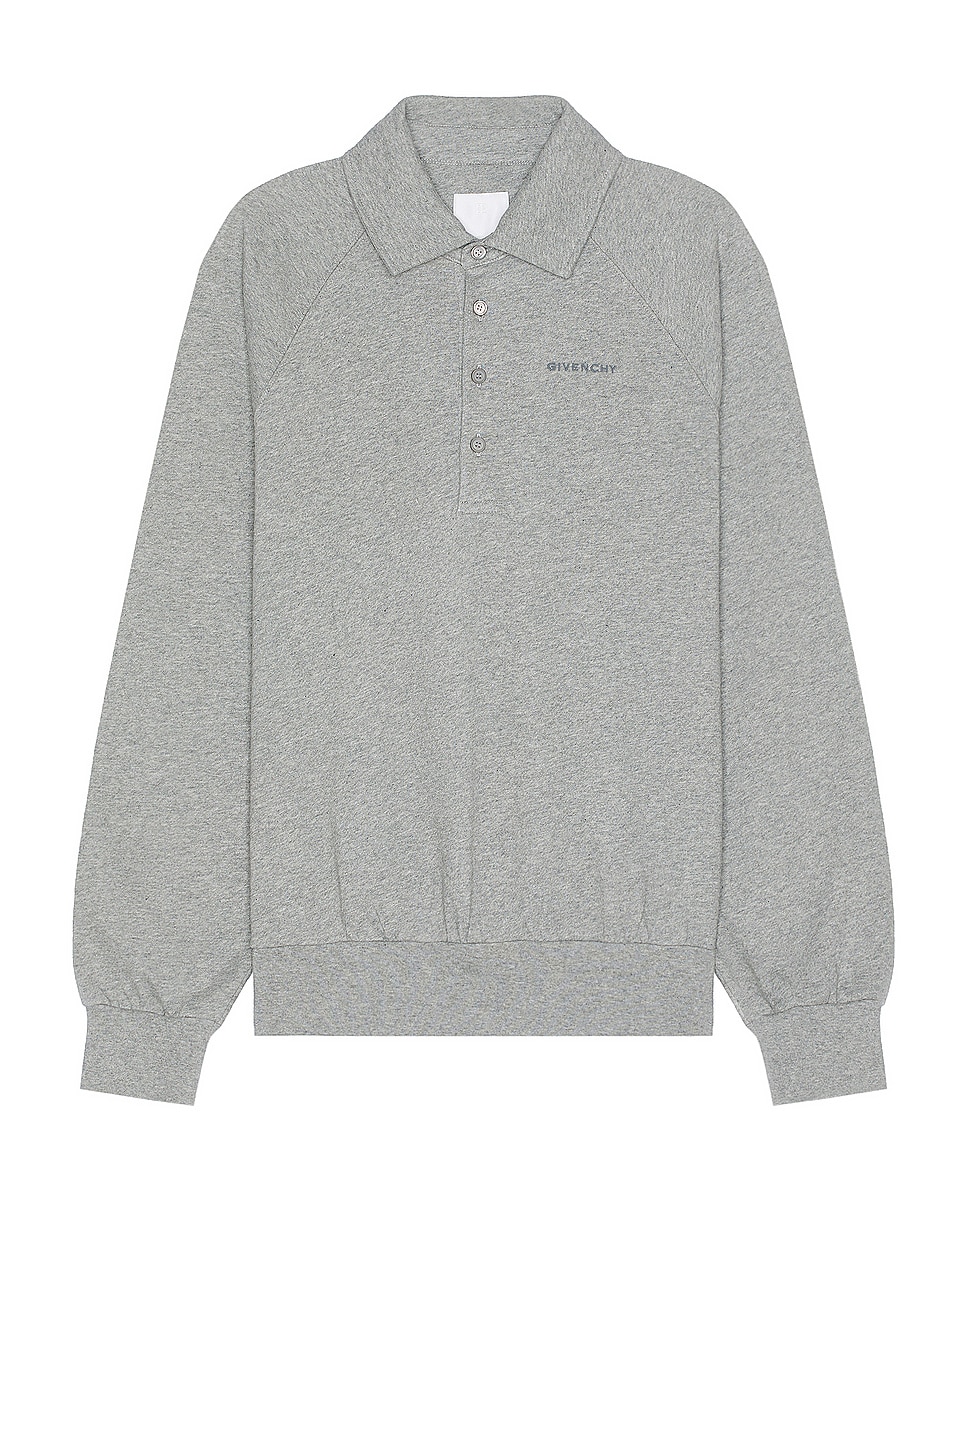 Image 1 of Givenchy Buttoned Sweatshirt in Light Grey Melange